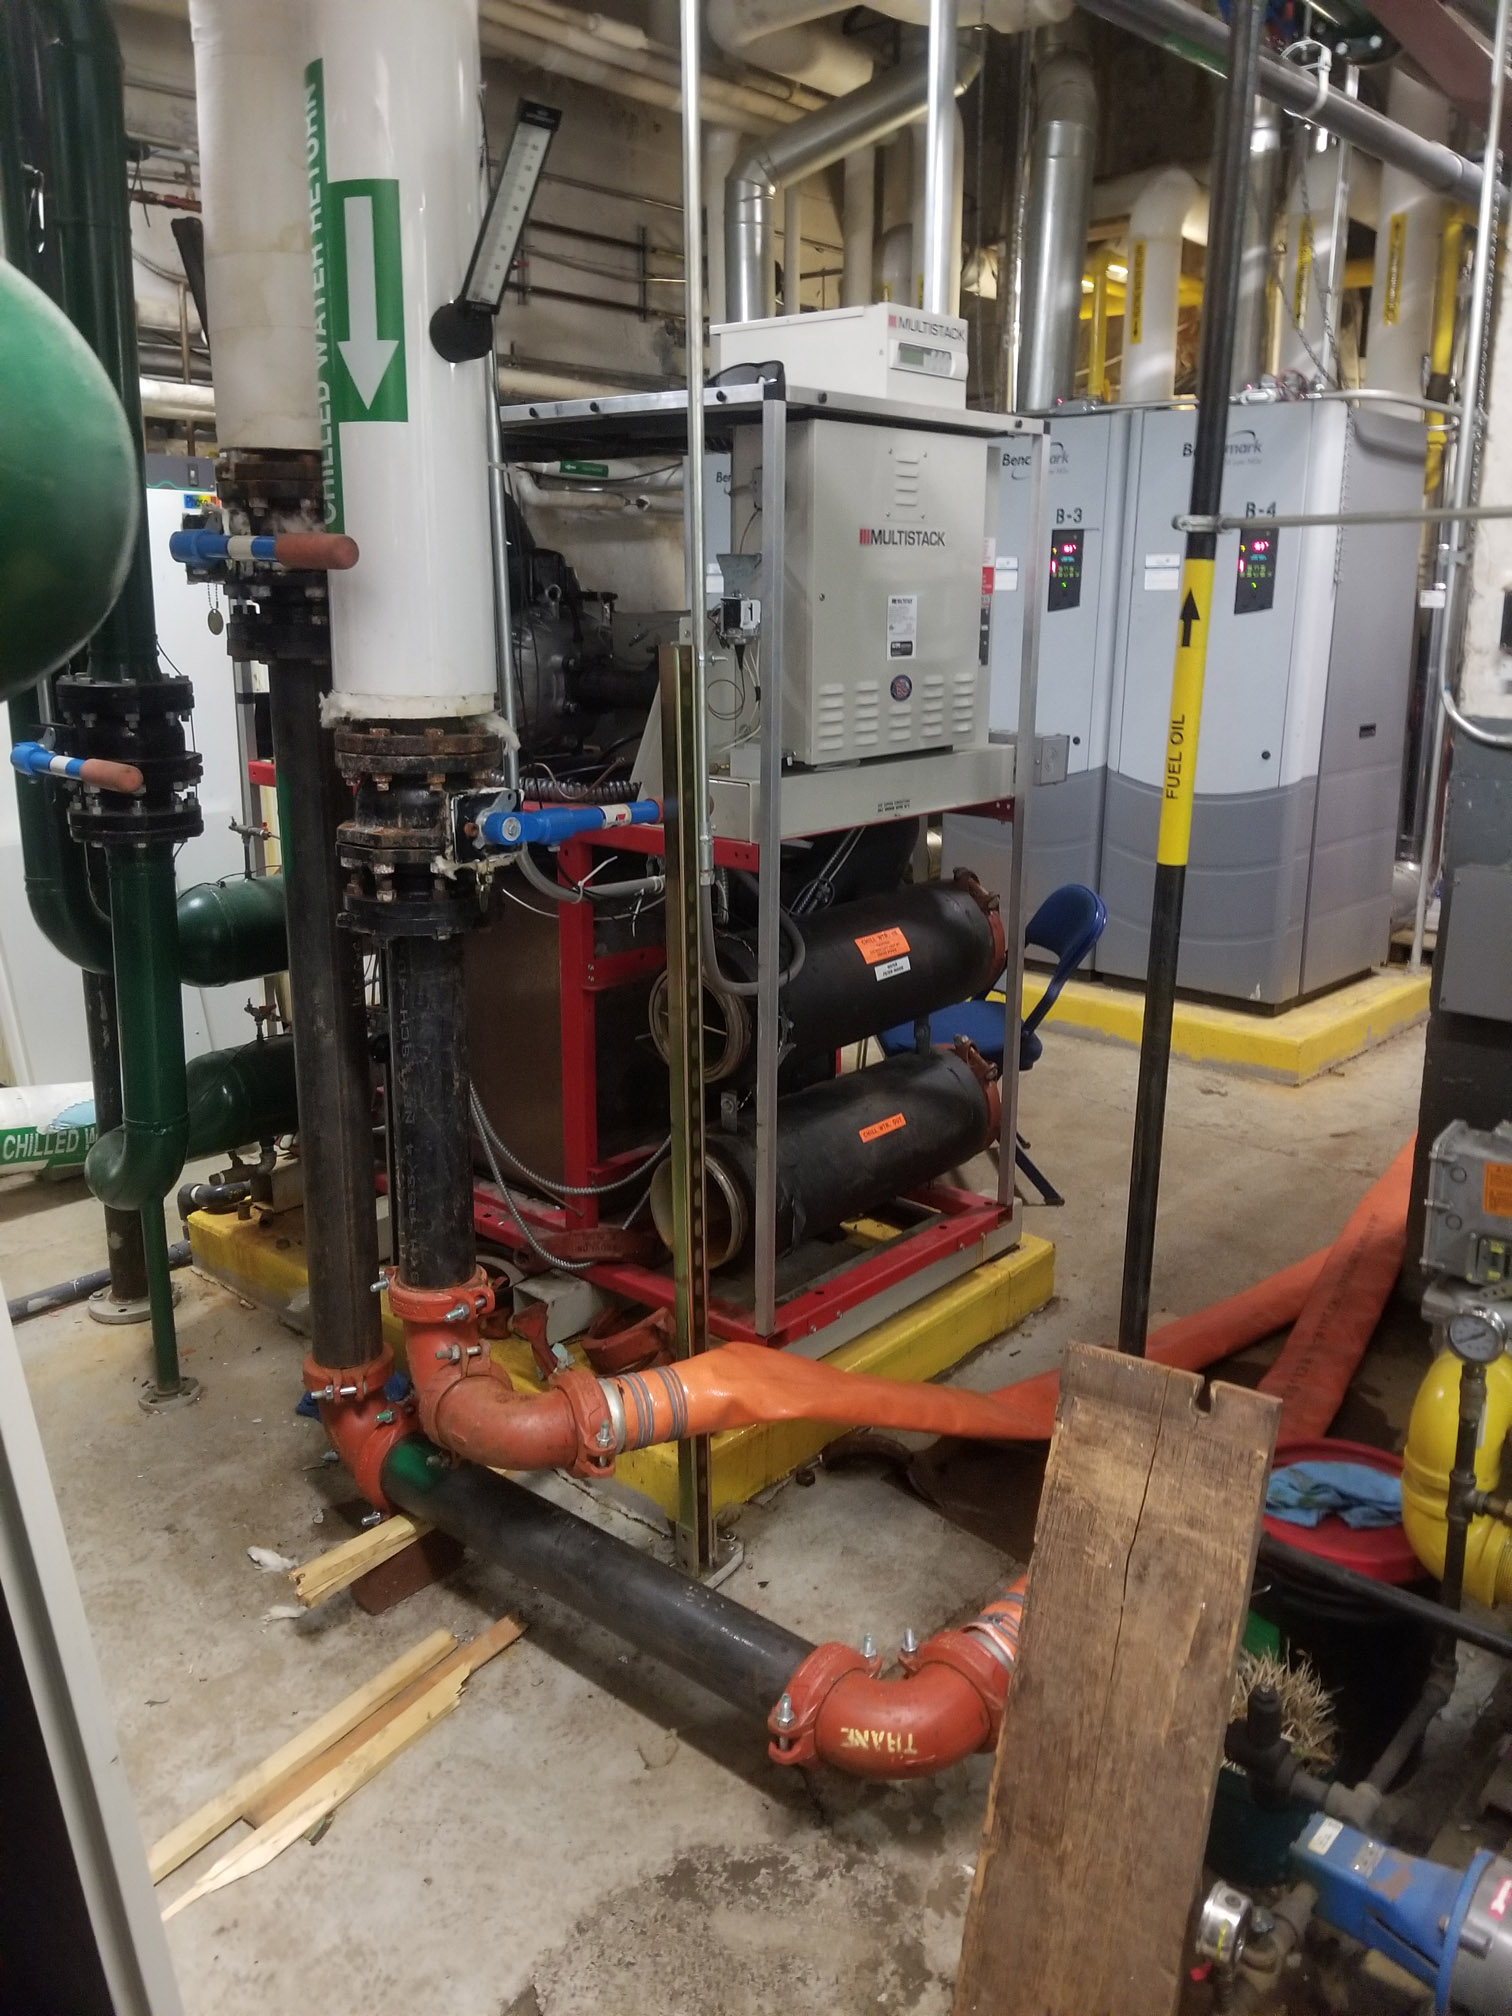 Air Cooled Chiller Rental Tamiami FL, Chiller AC Rental Tamiami FL, Temporary Chiller Tamiami FL, Rental Chiller Installation Tamiami FL